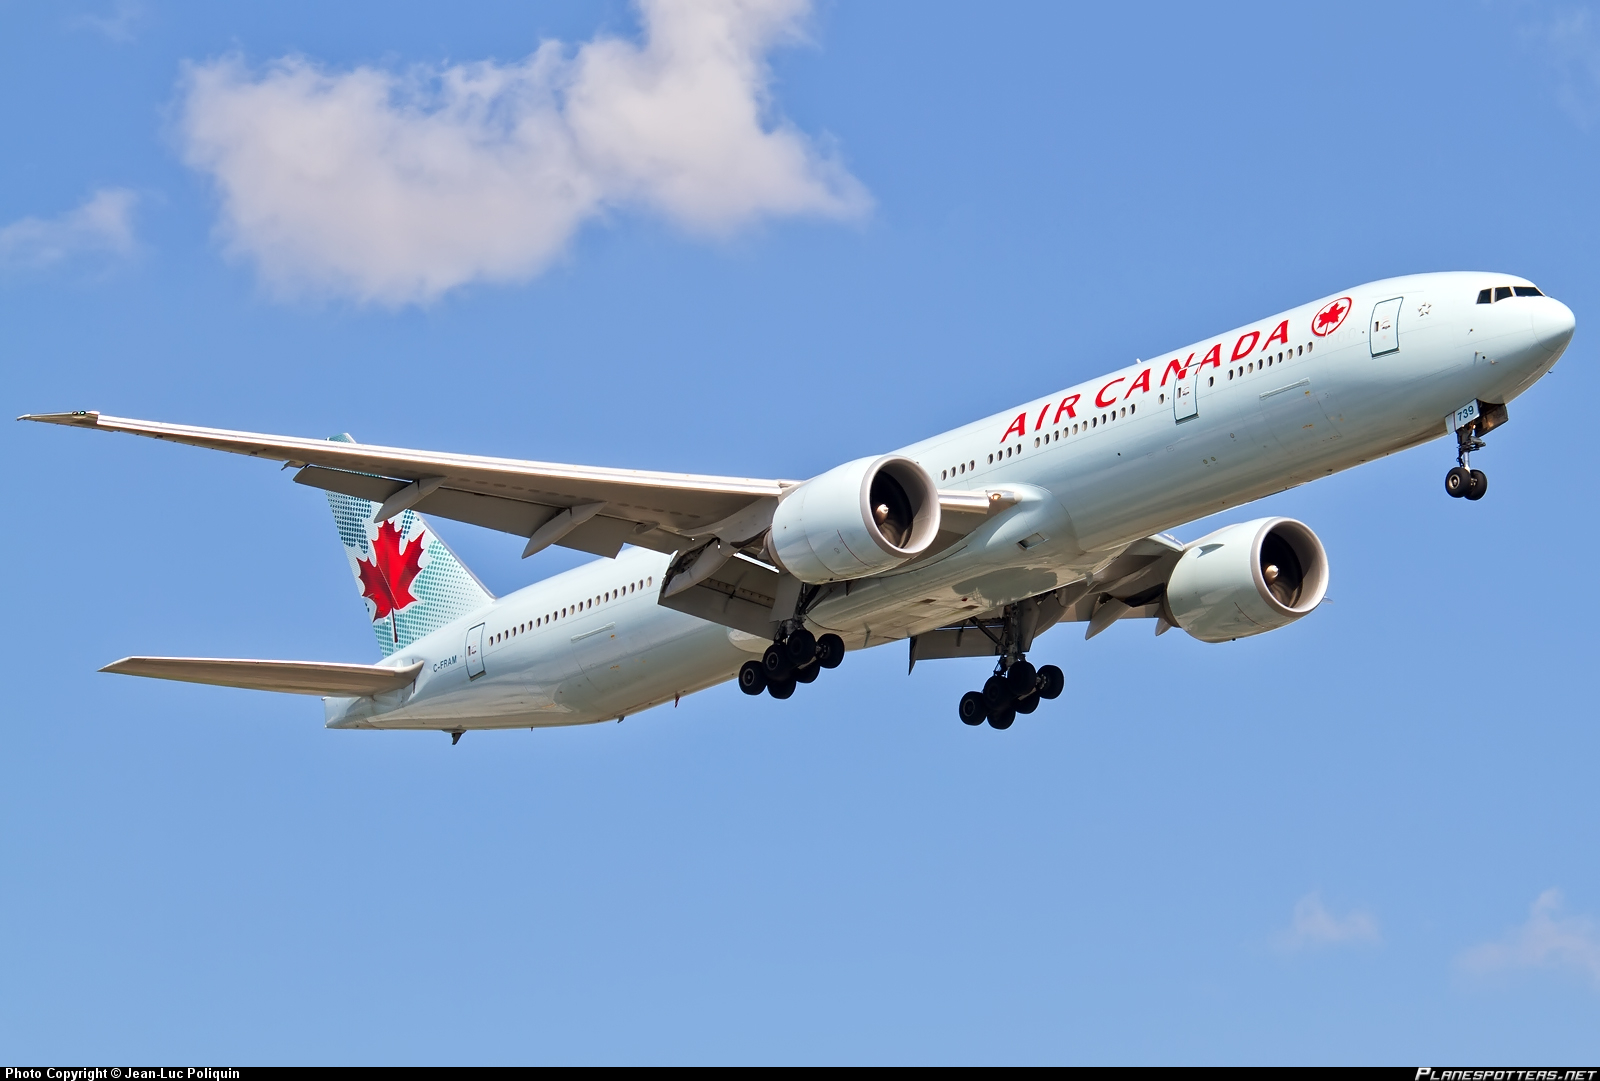 Air Canada rolling out in-flight WiFi on international ...